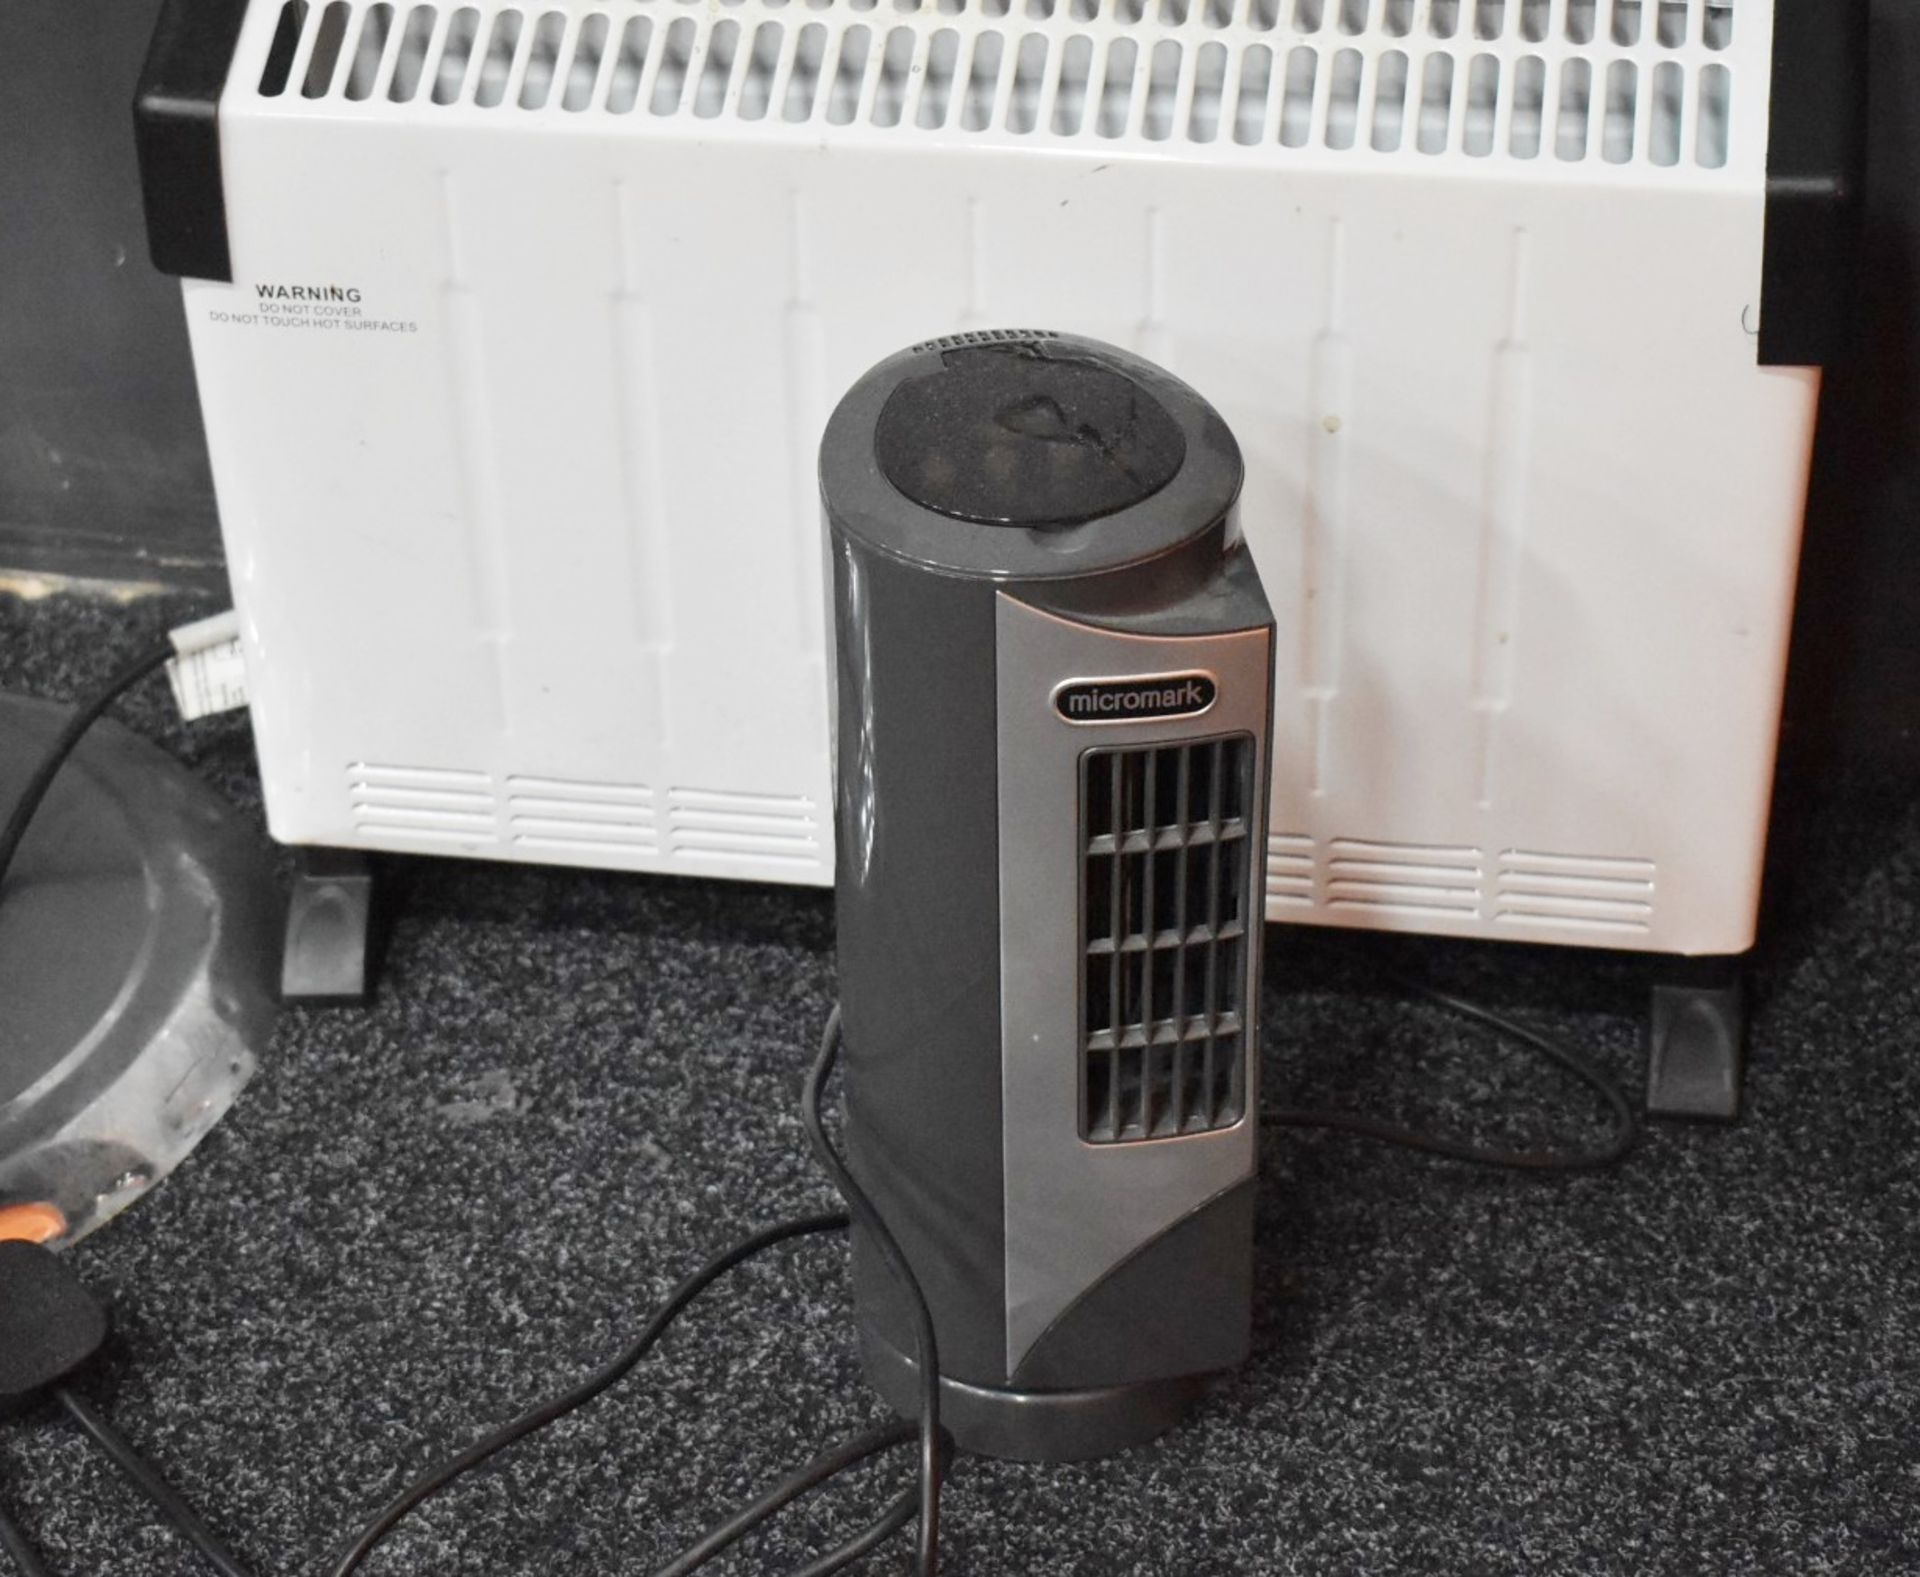 3 x Various Heaters and Fans - Includes Chrome Fan Pedestal, Mini Fan and Heater - Image 3 of 3